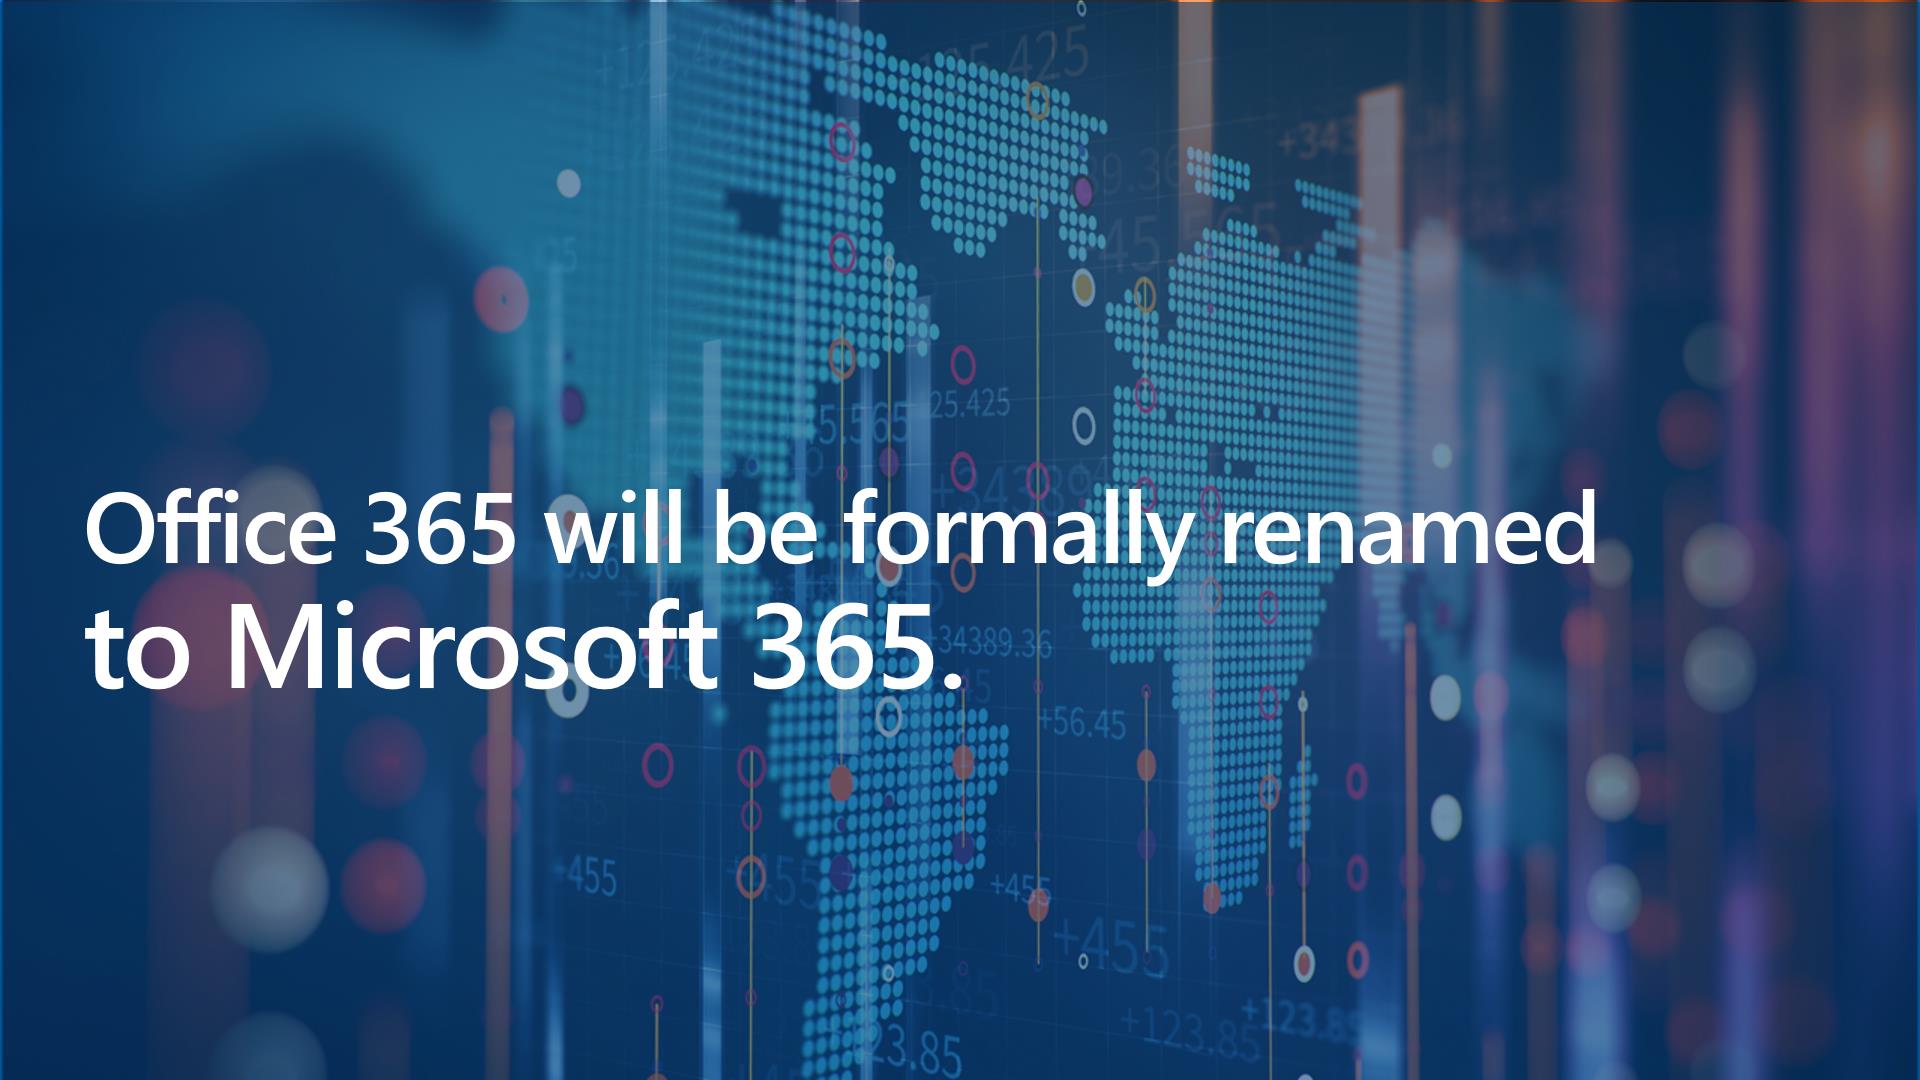 O365 Renamed as Microsoft 365 (featured image)